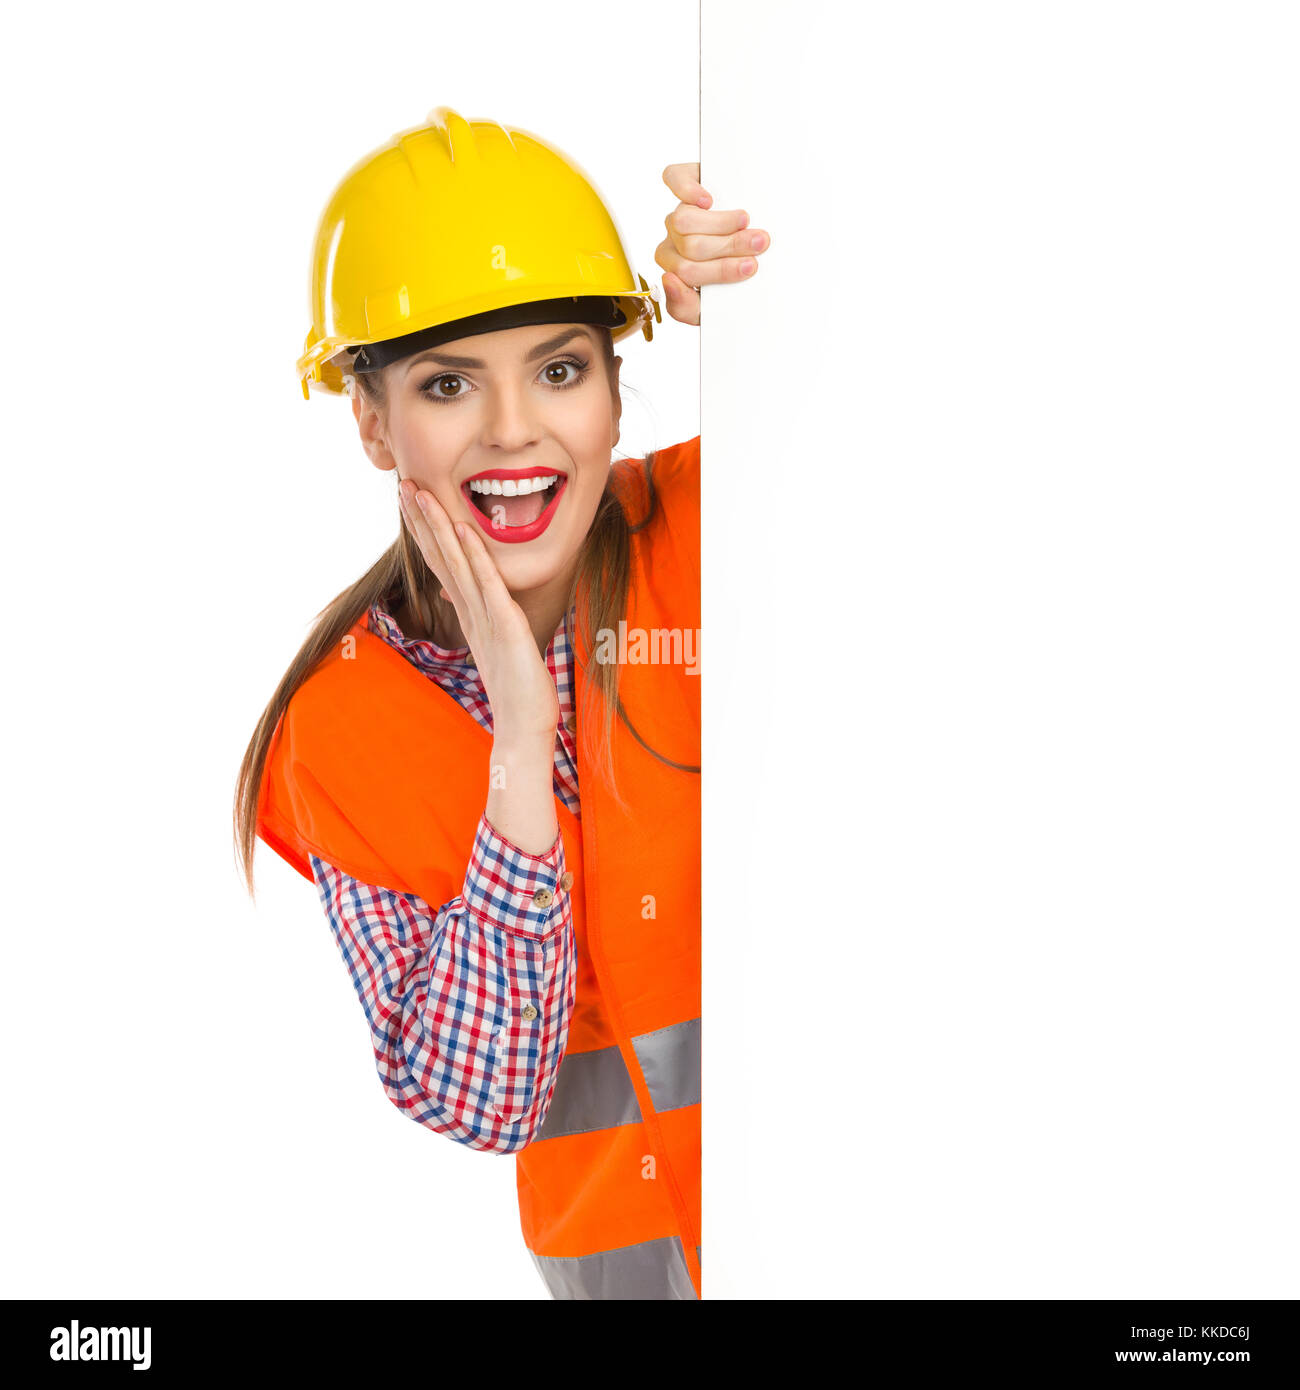 Excited young woman in yellow hardhat, orange reflective vest and lumberjack shirt posing with big banner with mouth open and hand on chin. Waist up s Stock Photo